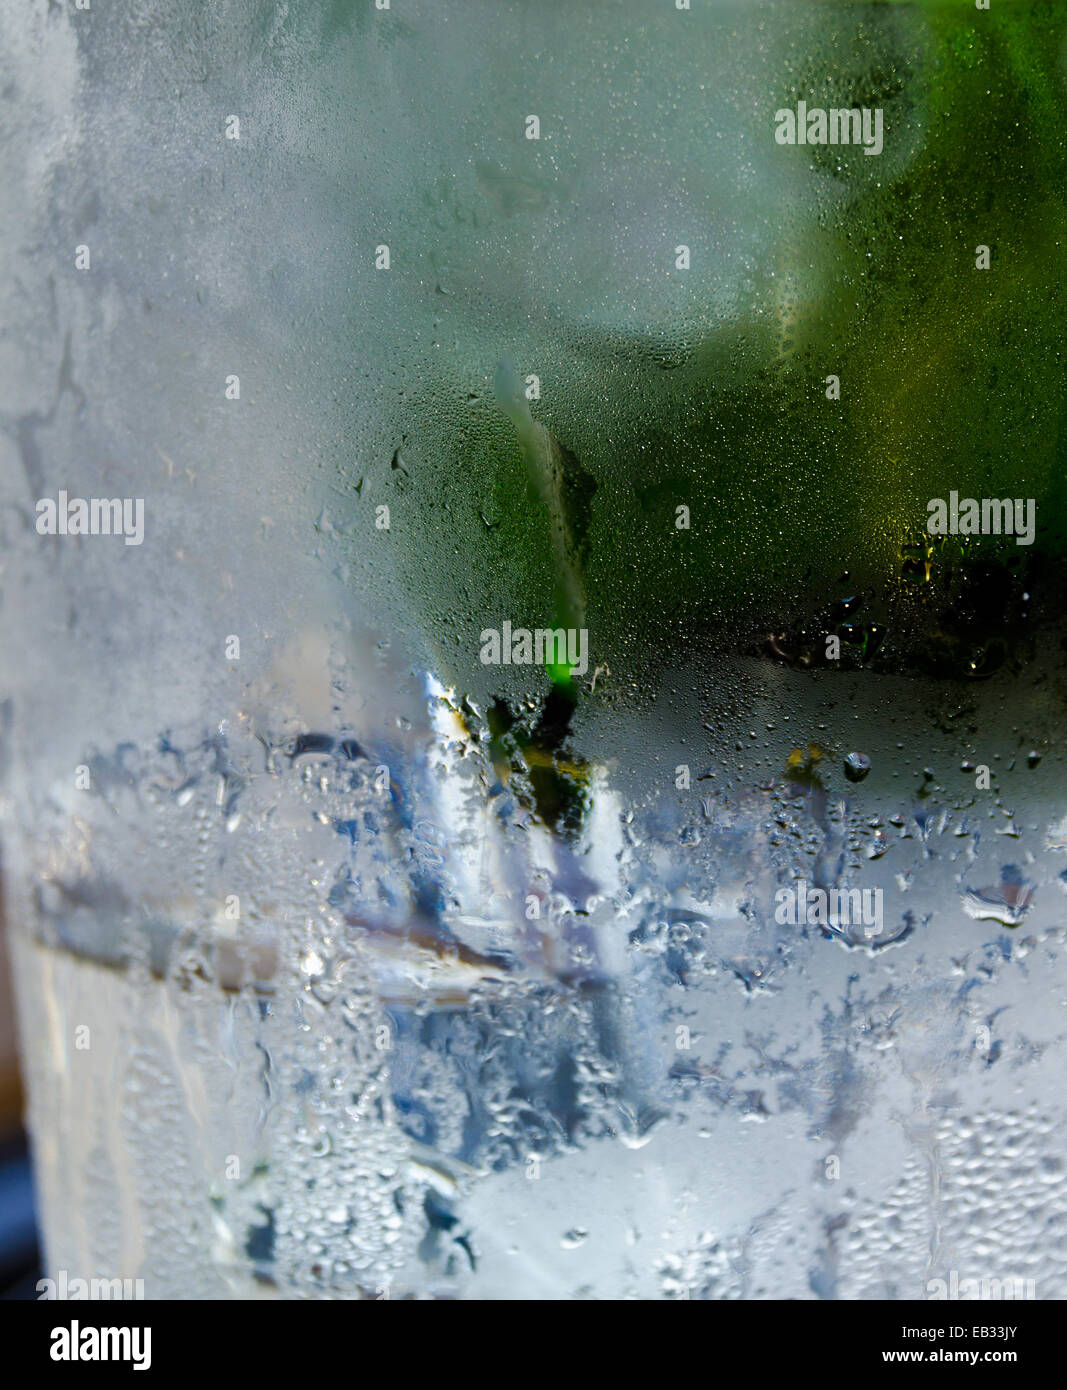 Condensation on outside of chilled glass containing ice and drinking fluid Stock Photo